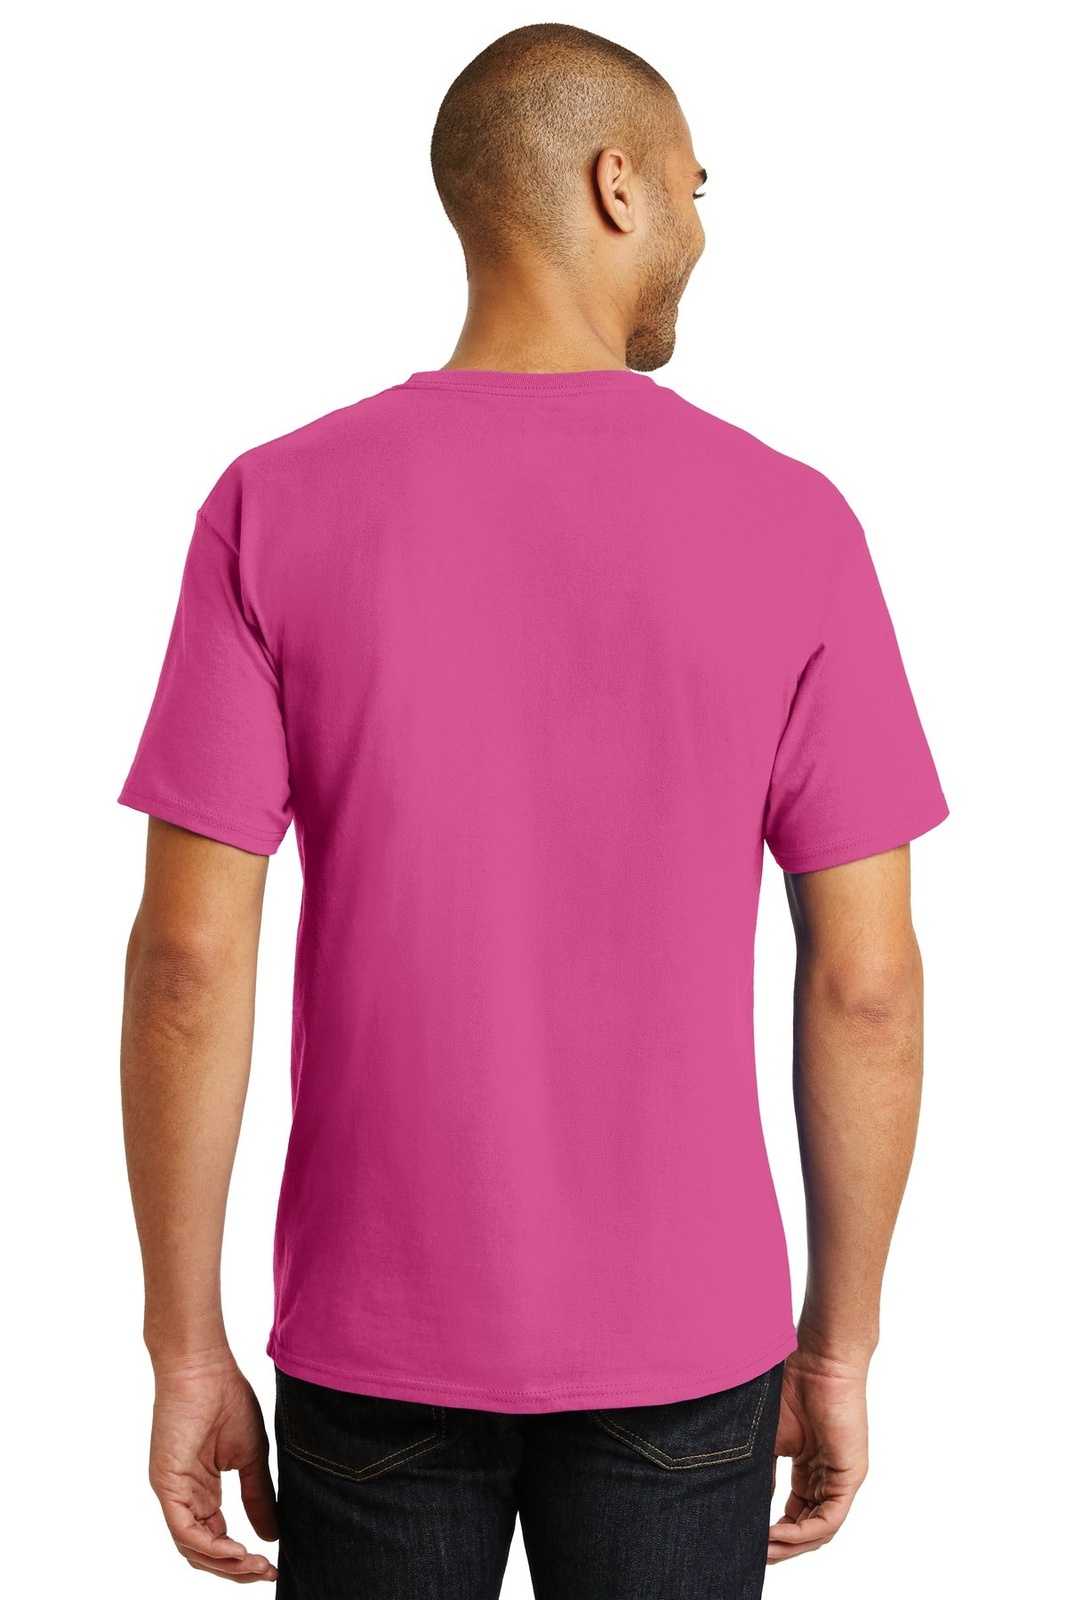 Hanes 5250 Tagless 100% Cotton T-Shirt - Wow Pink - HIT a Double